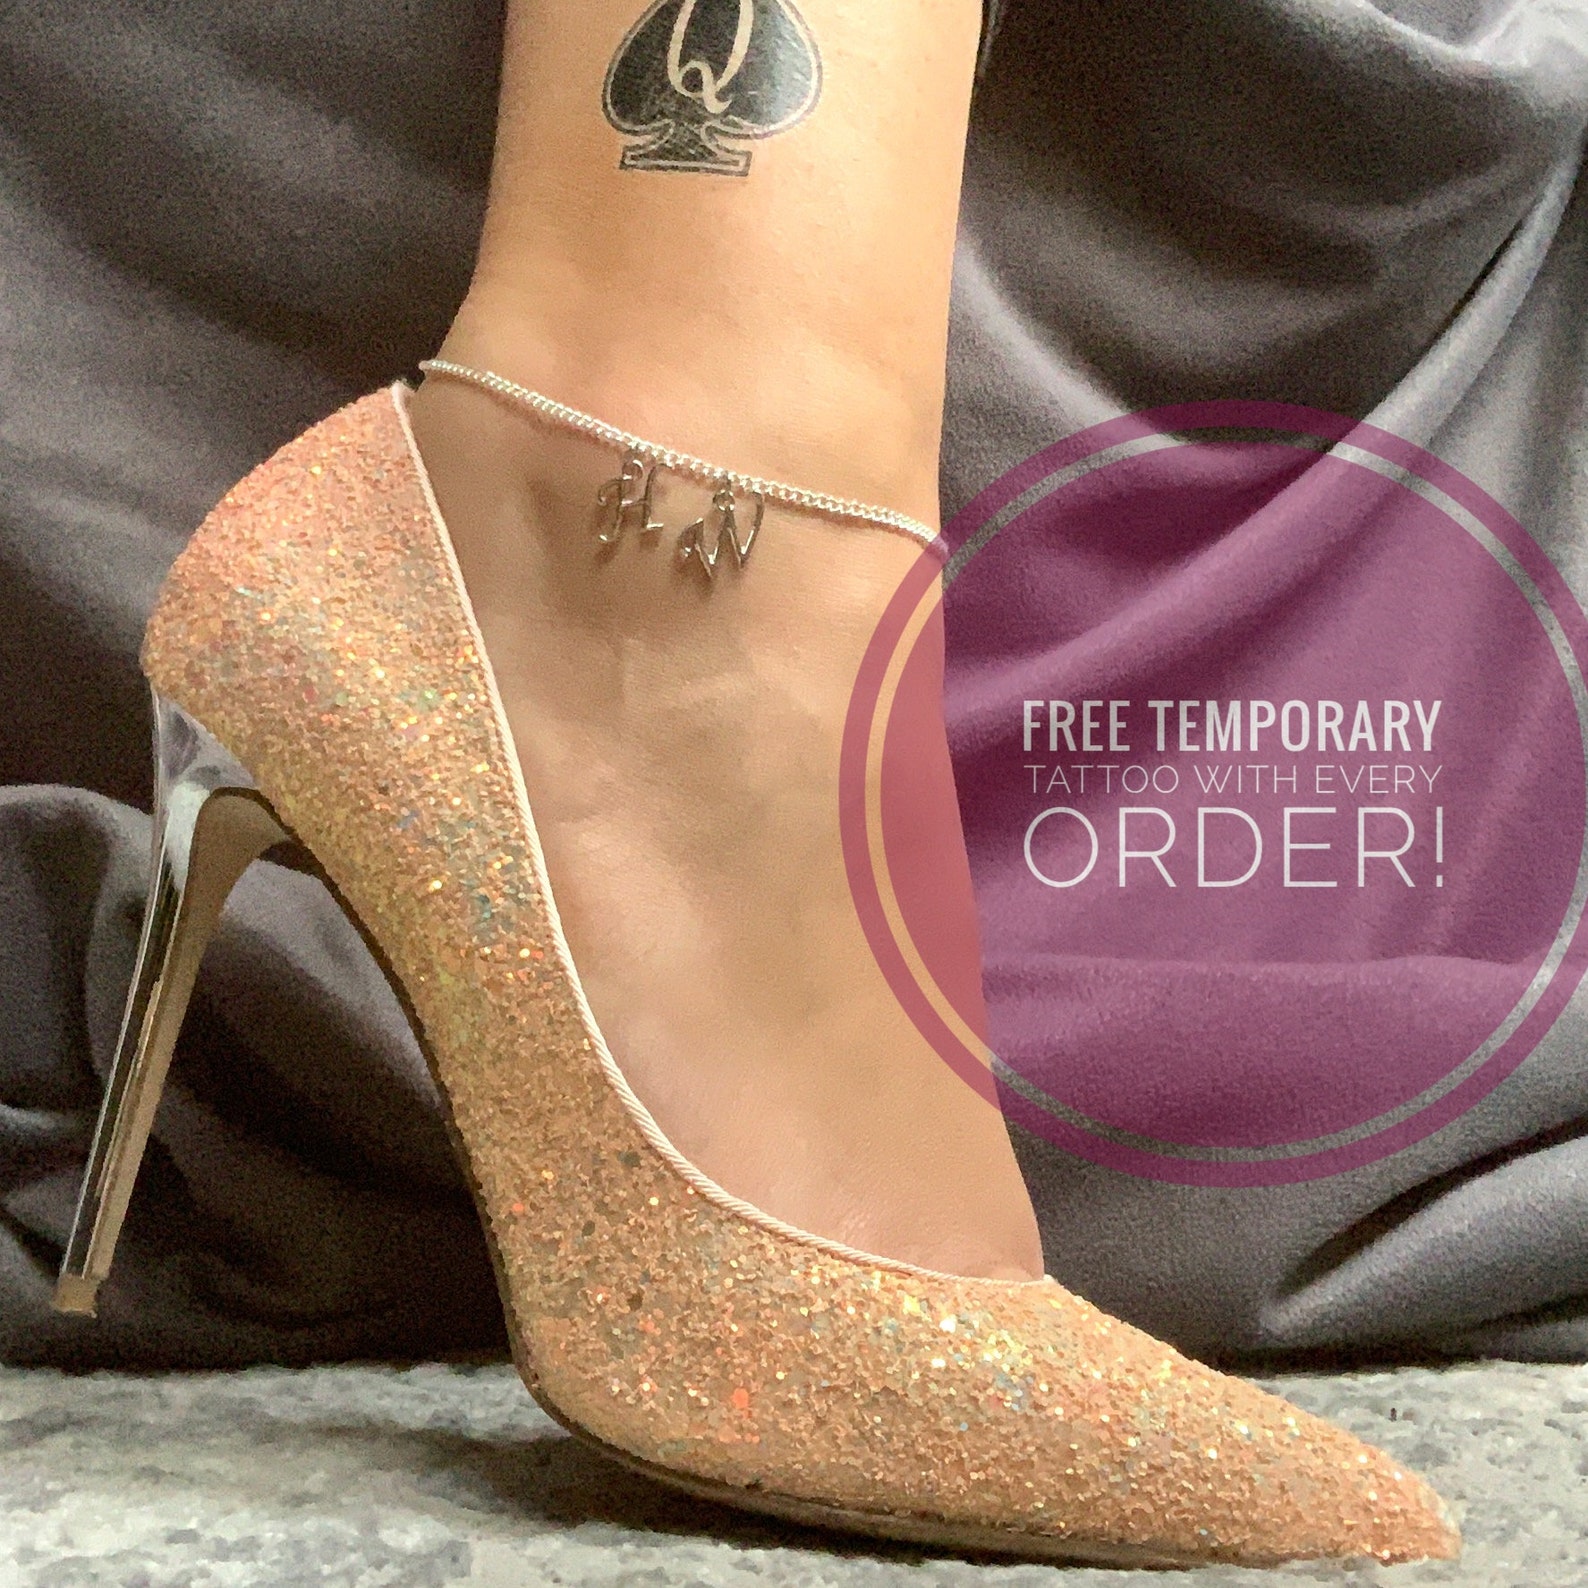 Hotwife Anklet Hot Wife Cuckold Anklet Swinger Lifestyle Etsy